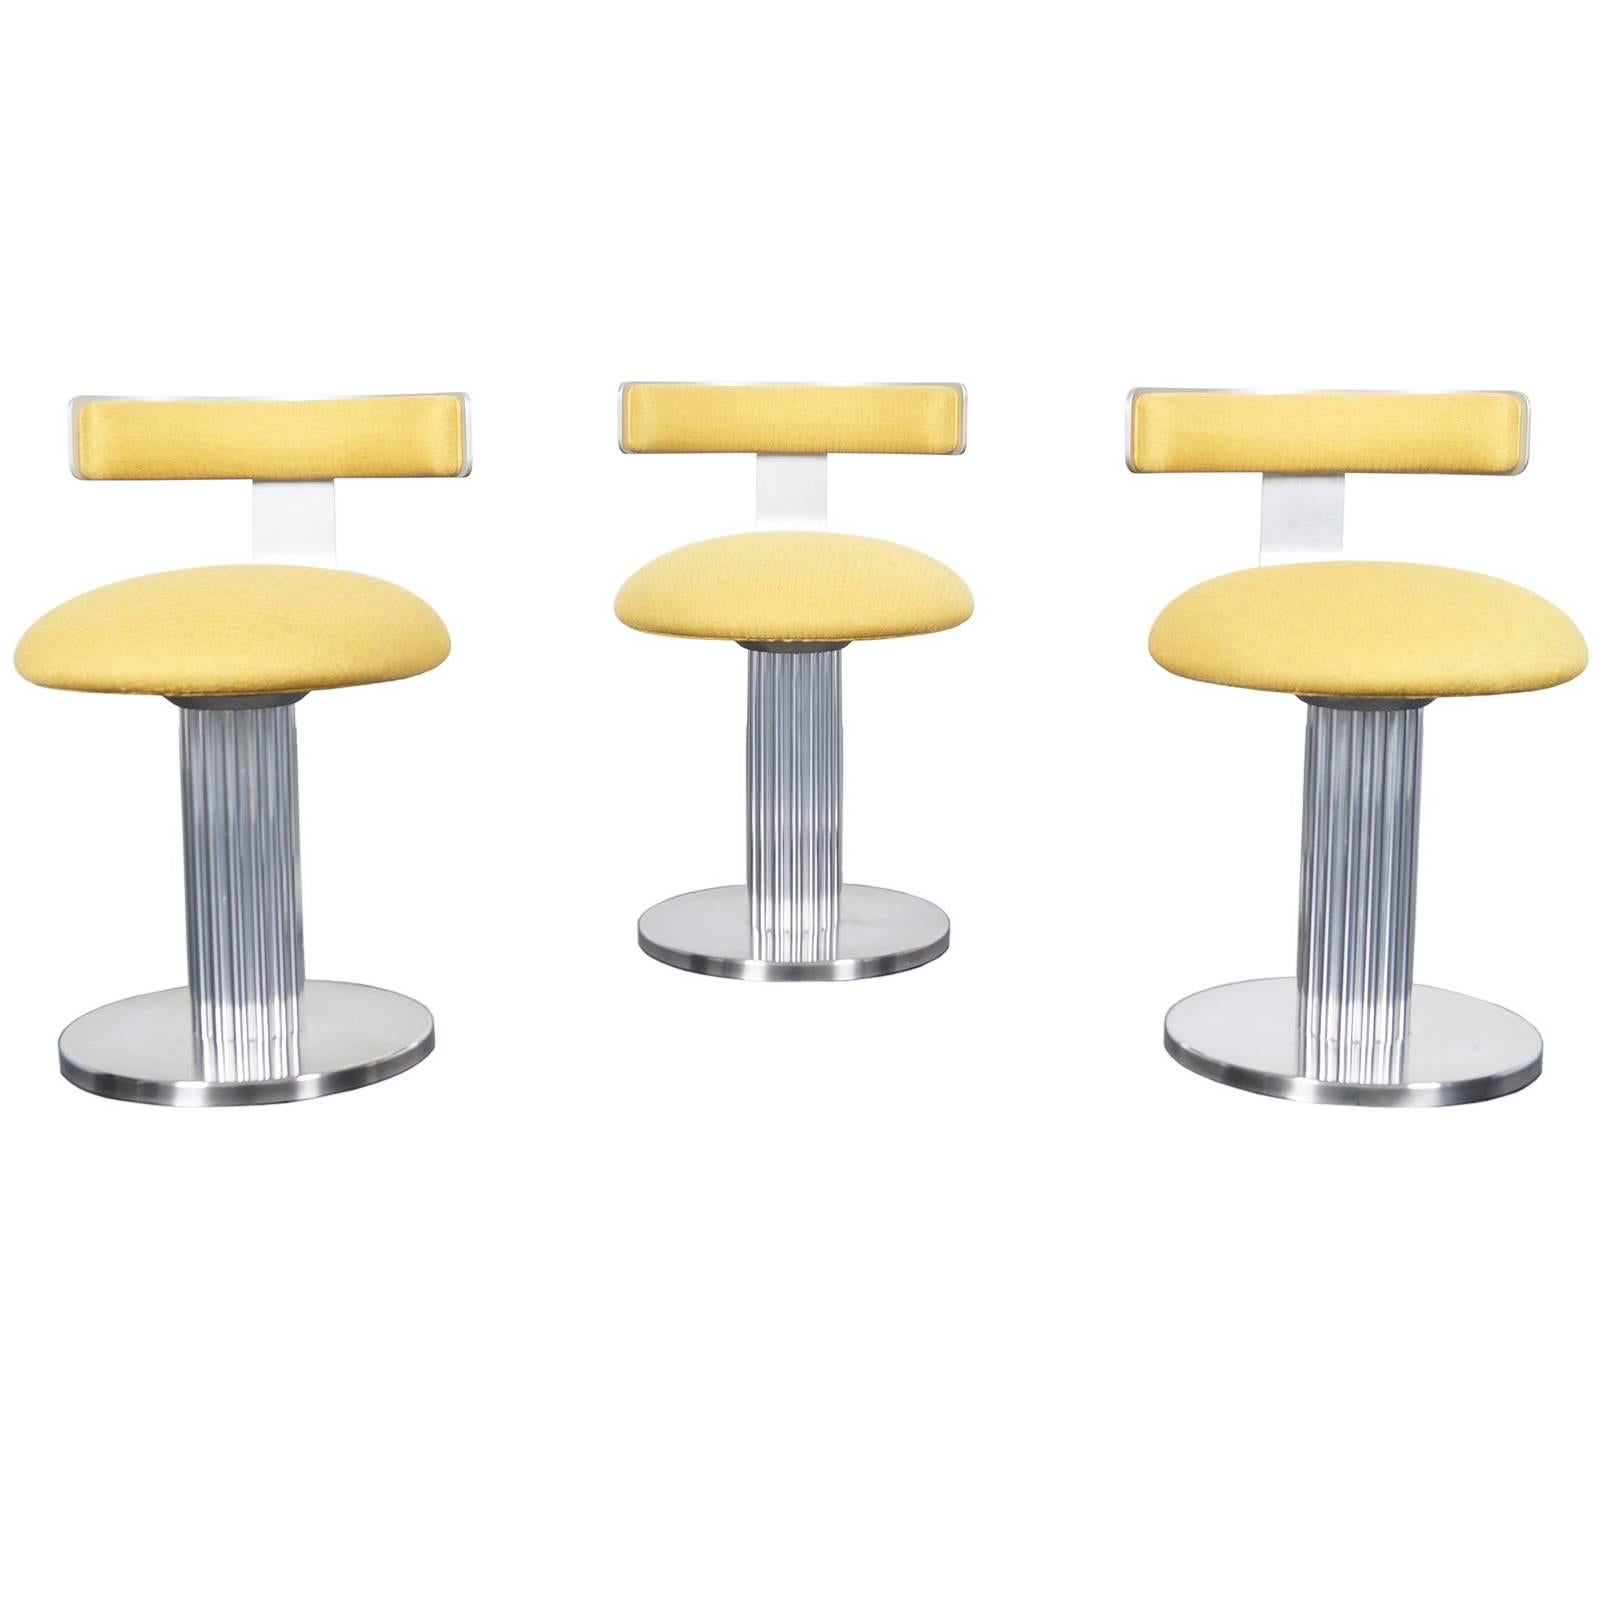 Vintage Chrome Swivel Stools by Design For Leisure